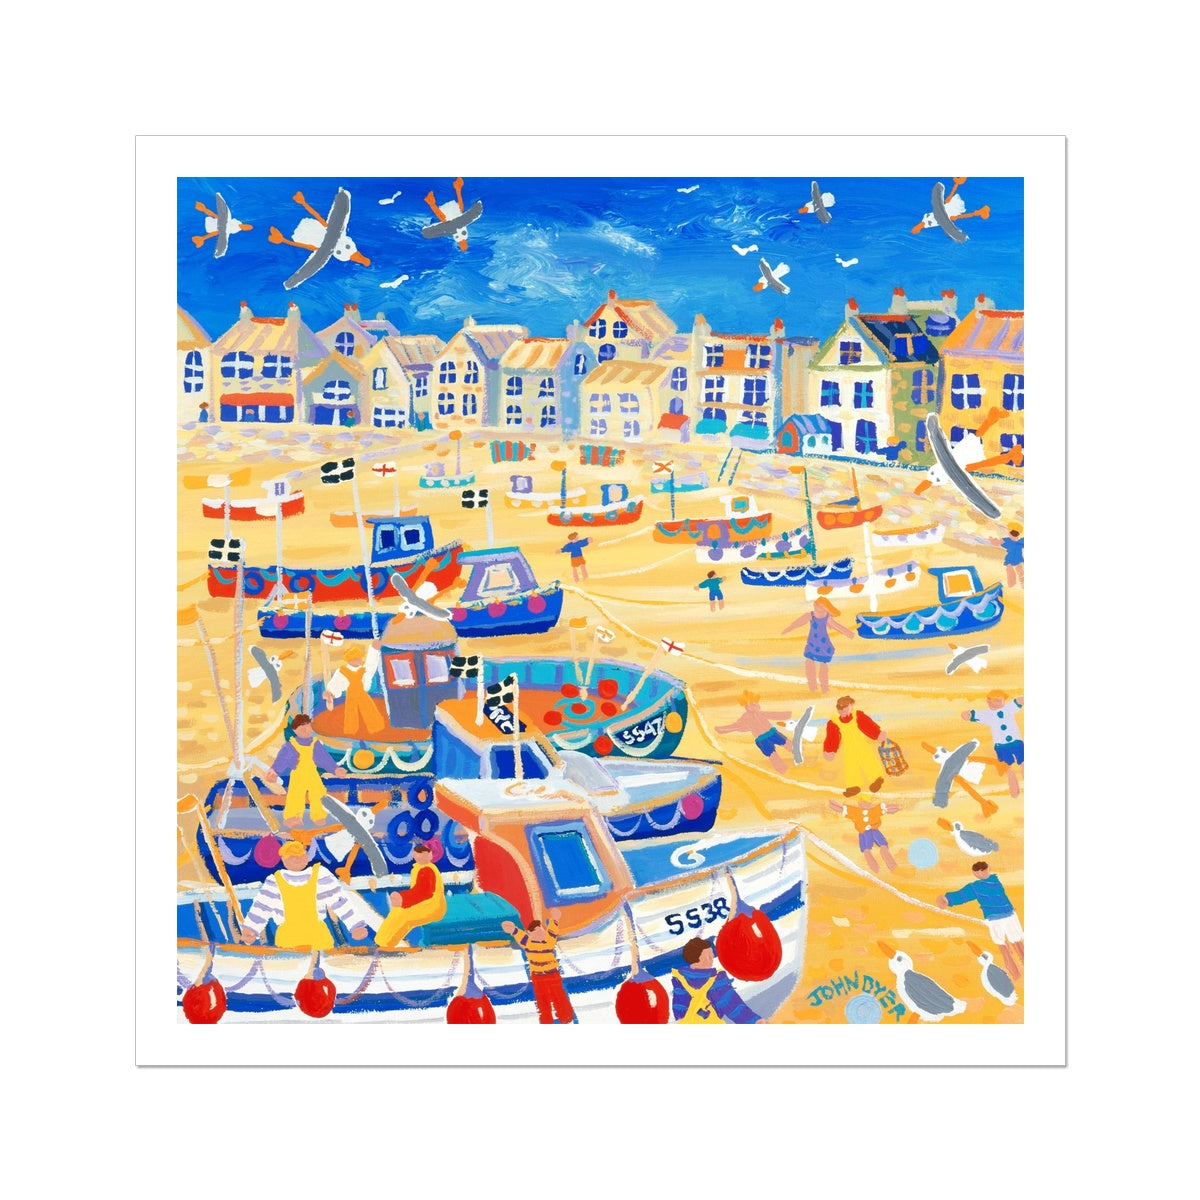 John Dyer Fine Art Print. Open Edition Cornish Art Print. 'Boats and ropes, St Ives'. Cornwall Art Gallery